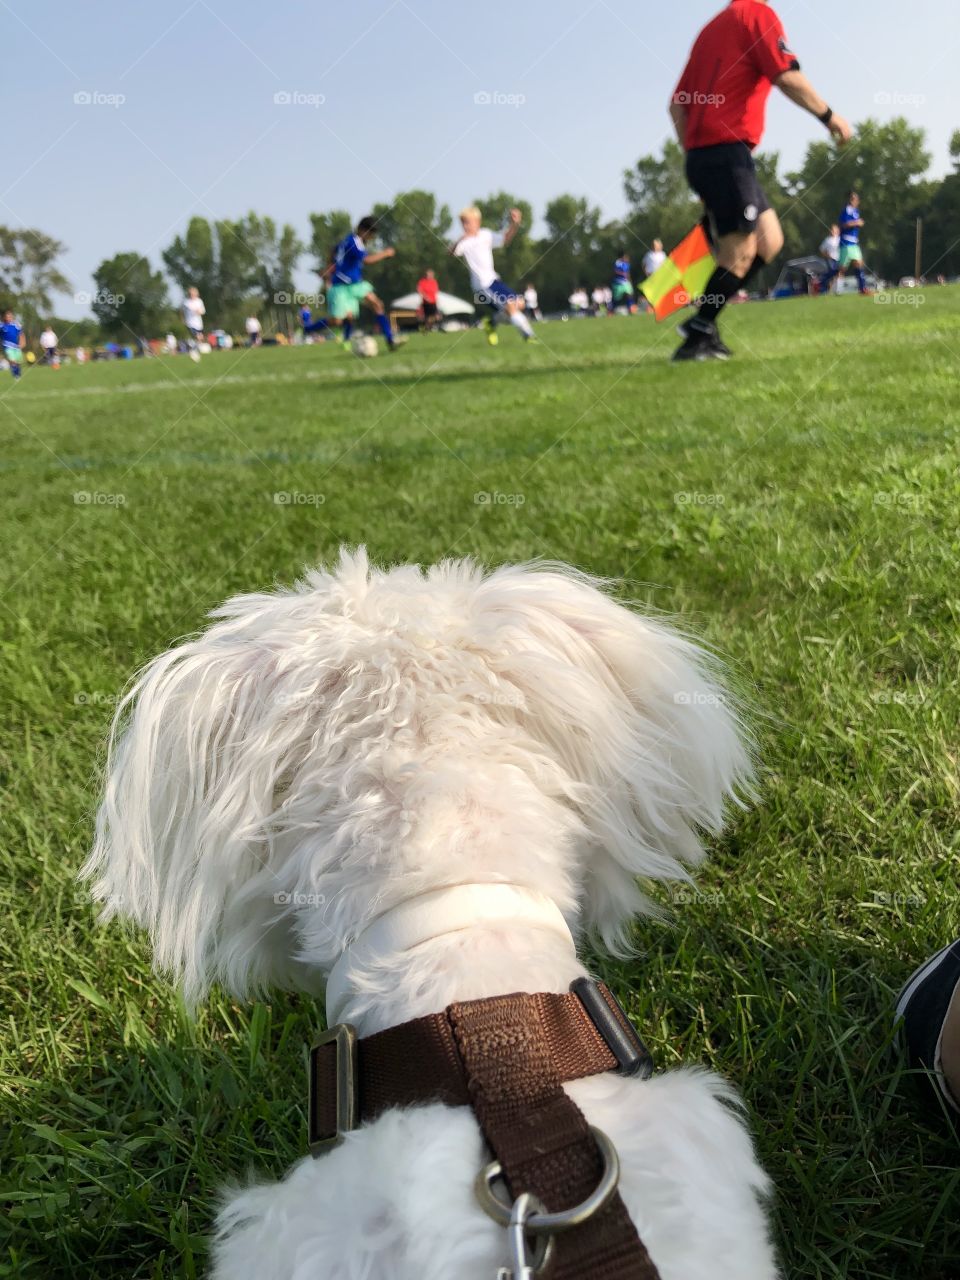 Enjoying the youth soccer game with my doggie in a sunny day